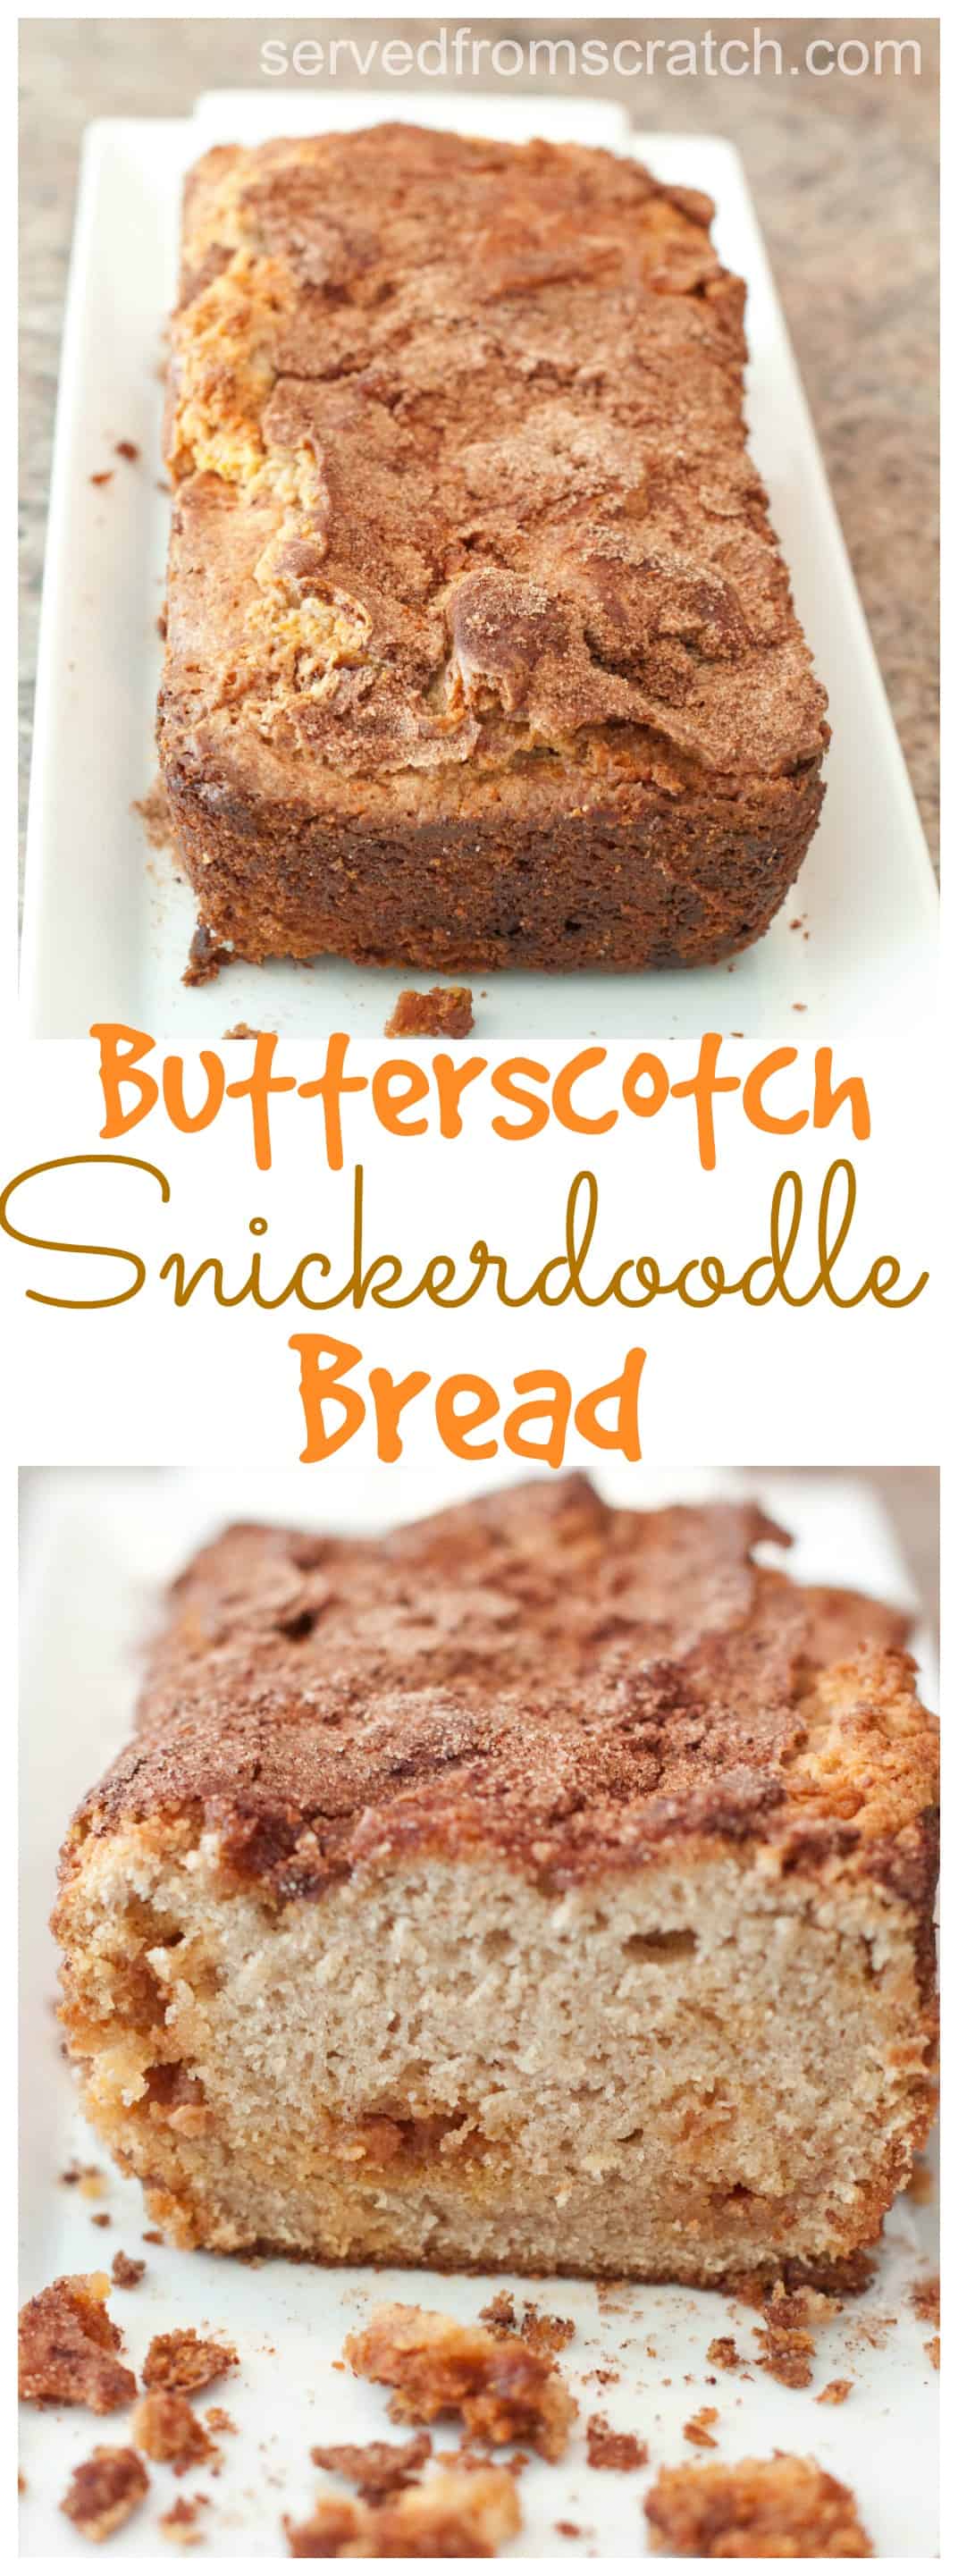 Your favorite cinnamon cookie baked into a delicious sweet loaf with butterscotch chips!